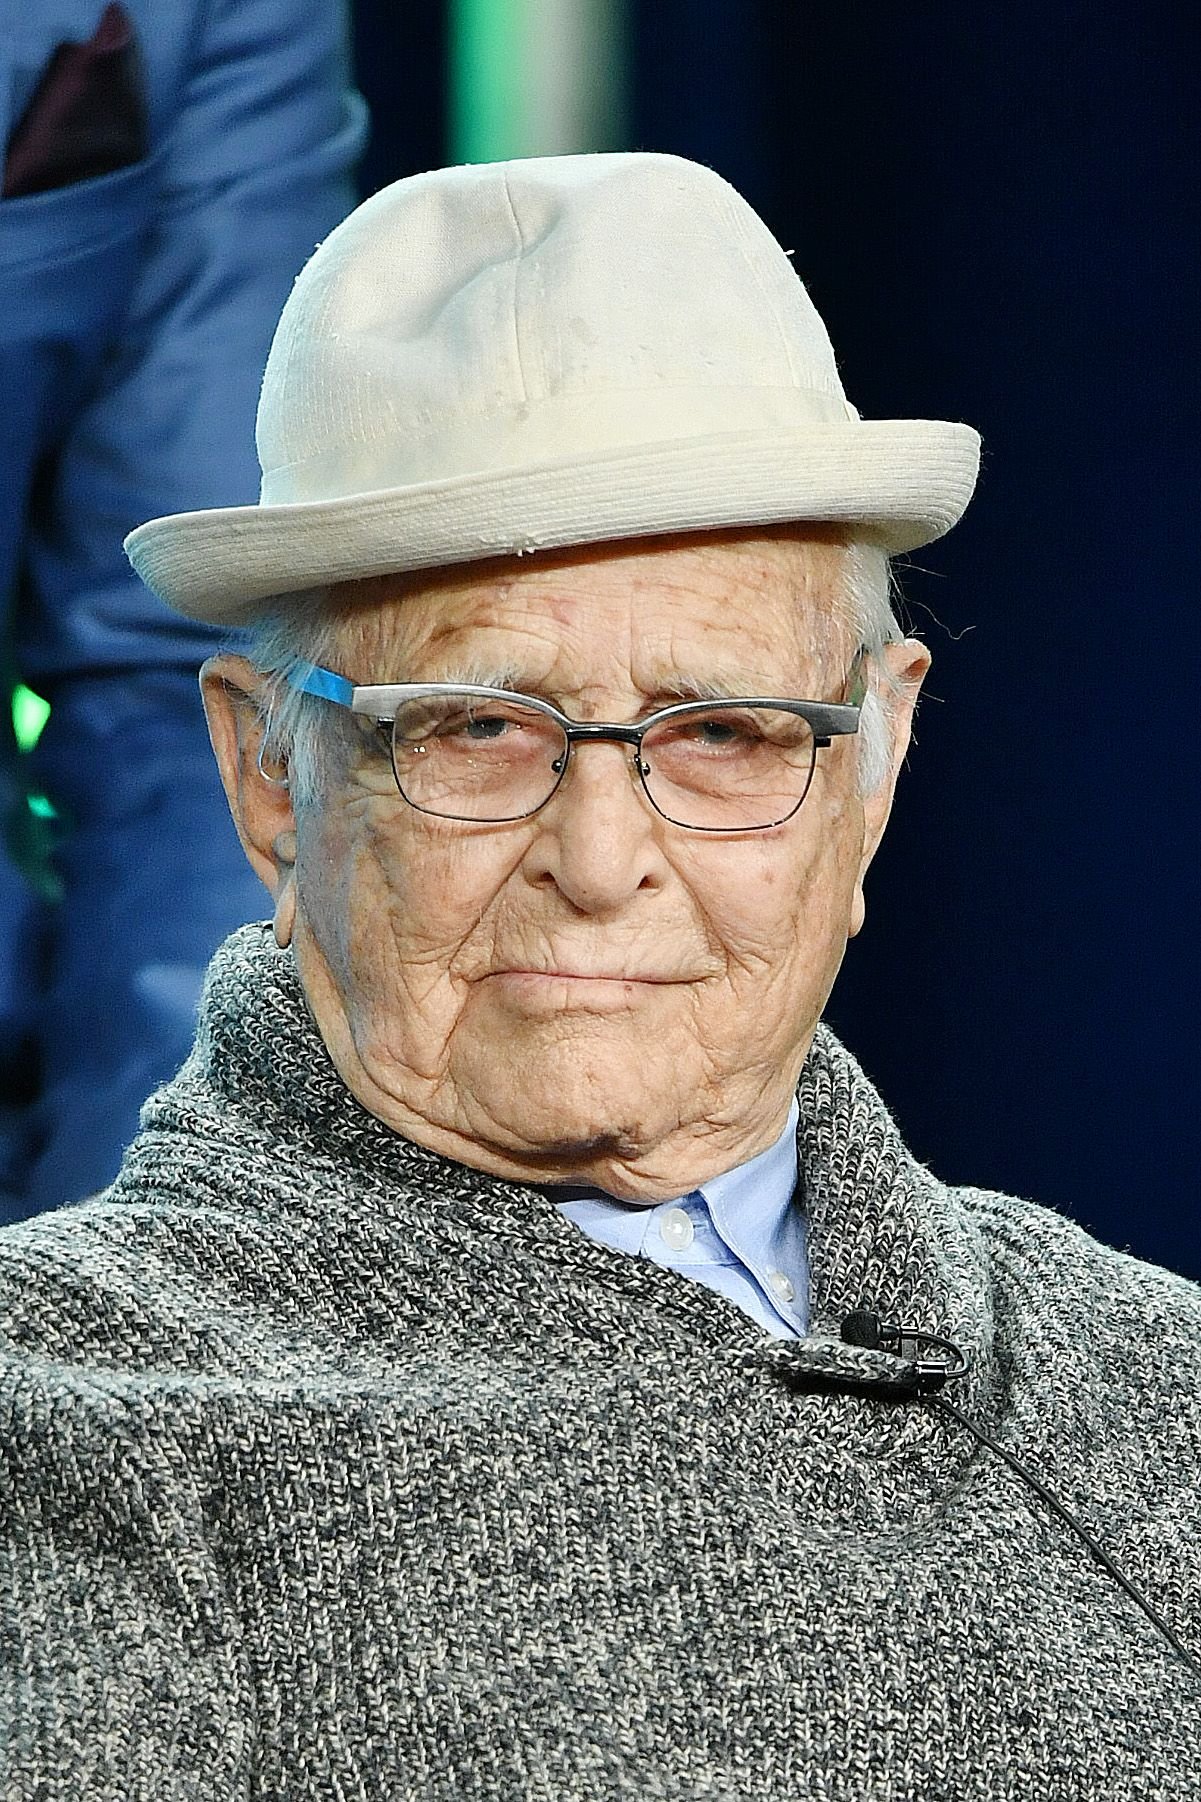 Norman Lear of "One Day at a Time" at the 2020 Winter TCA Press Tour in Pasadena | Source: Getty Images